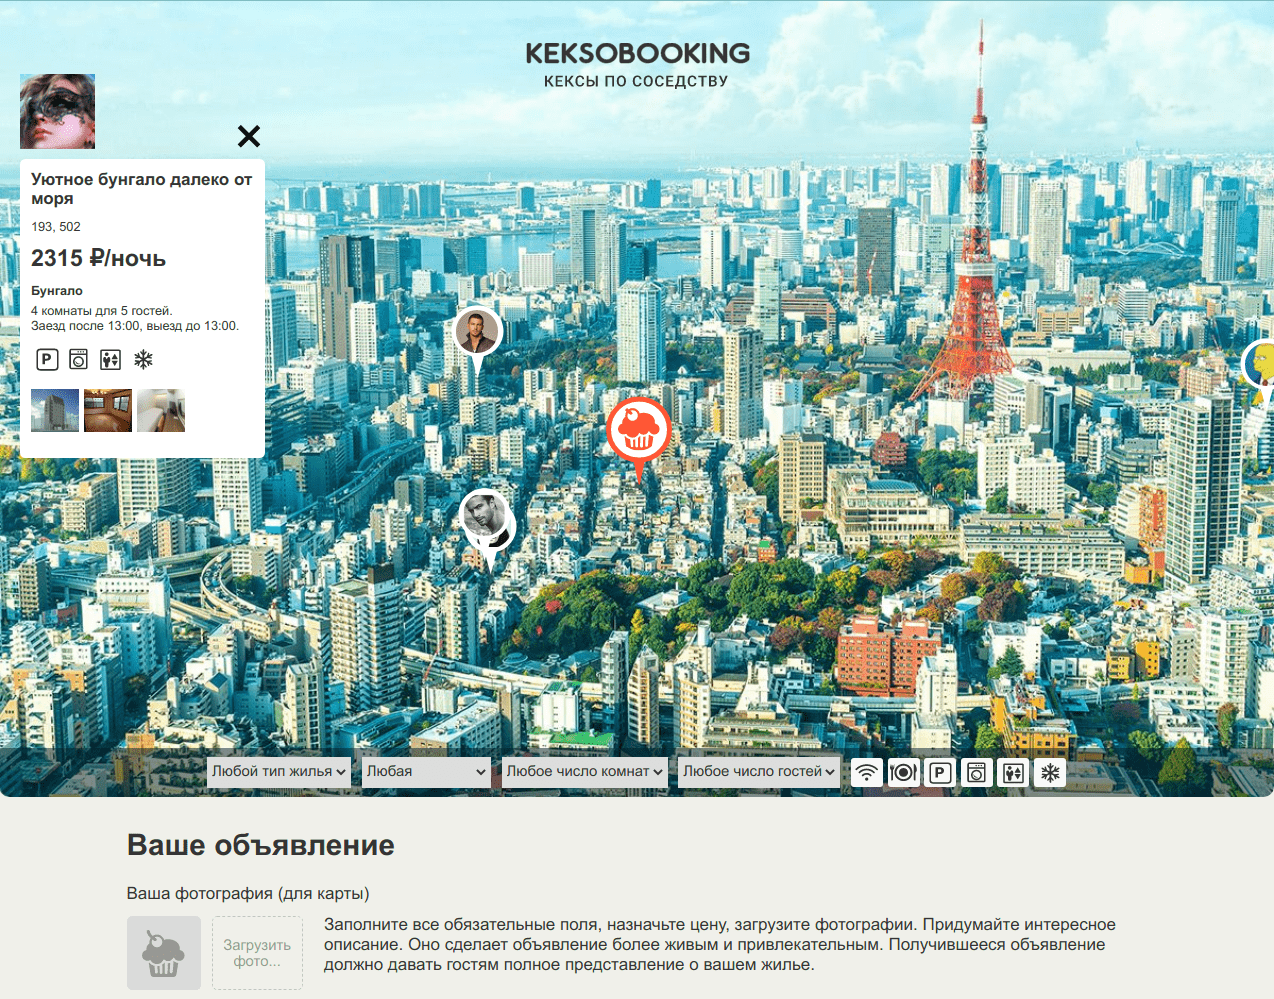 Booking service 'Keksobooking' website cover